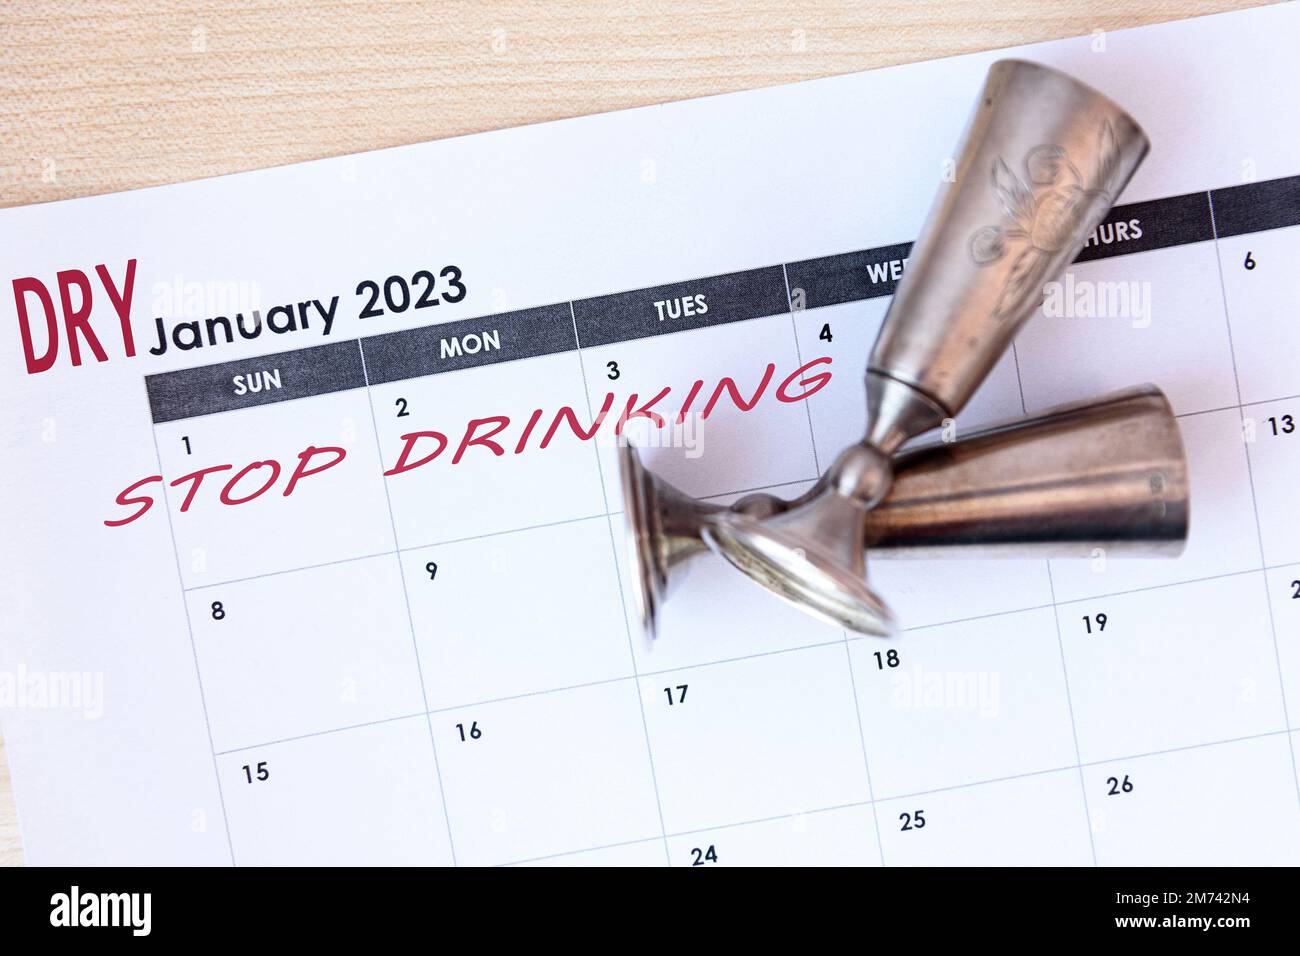 Calendar reminder for Dry January - stop drinking for the month Stock Photo